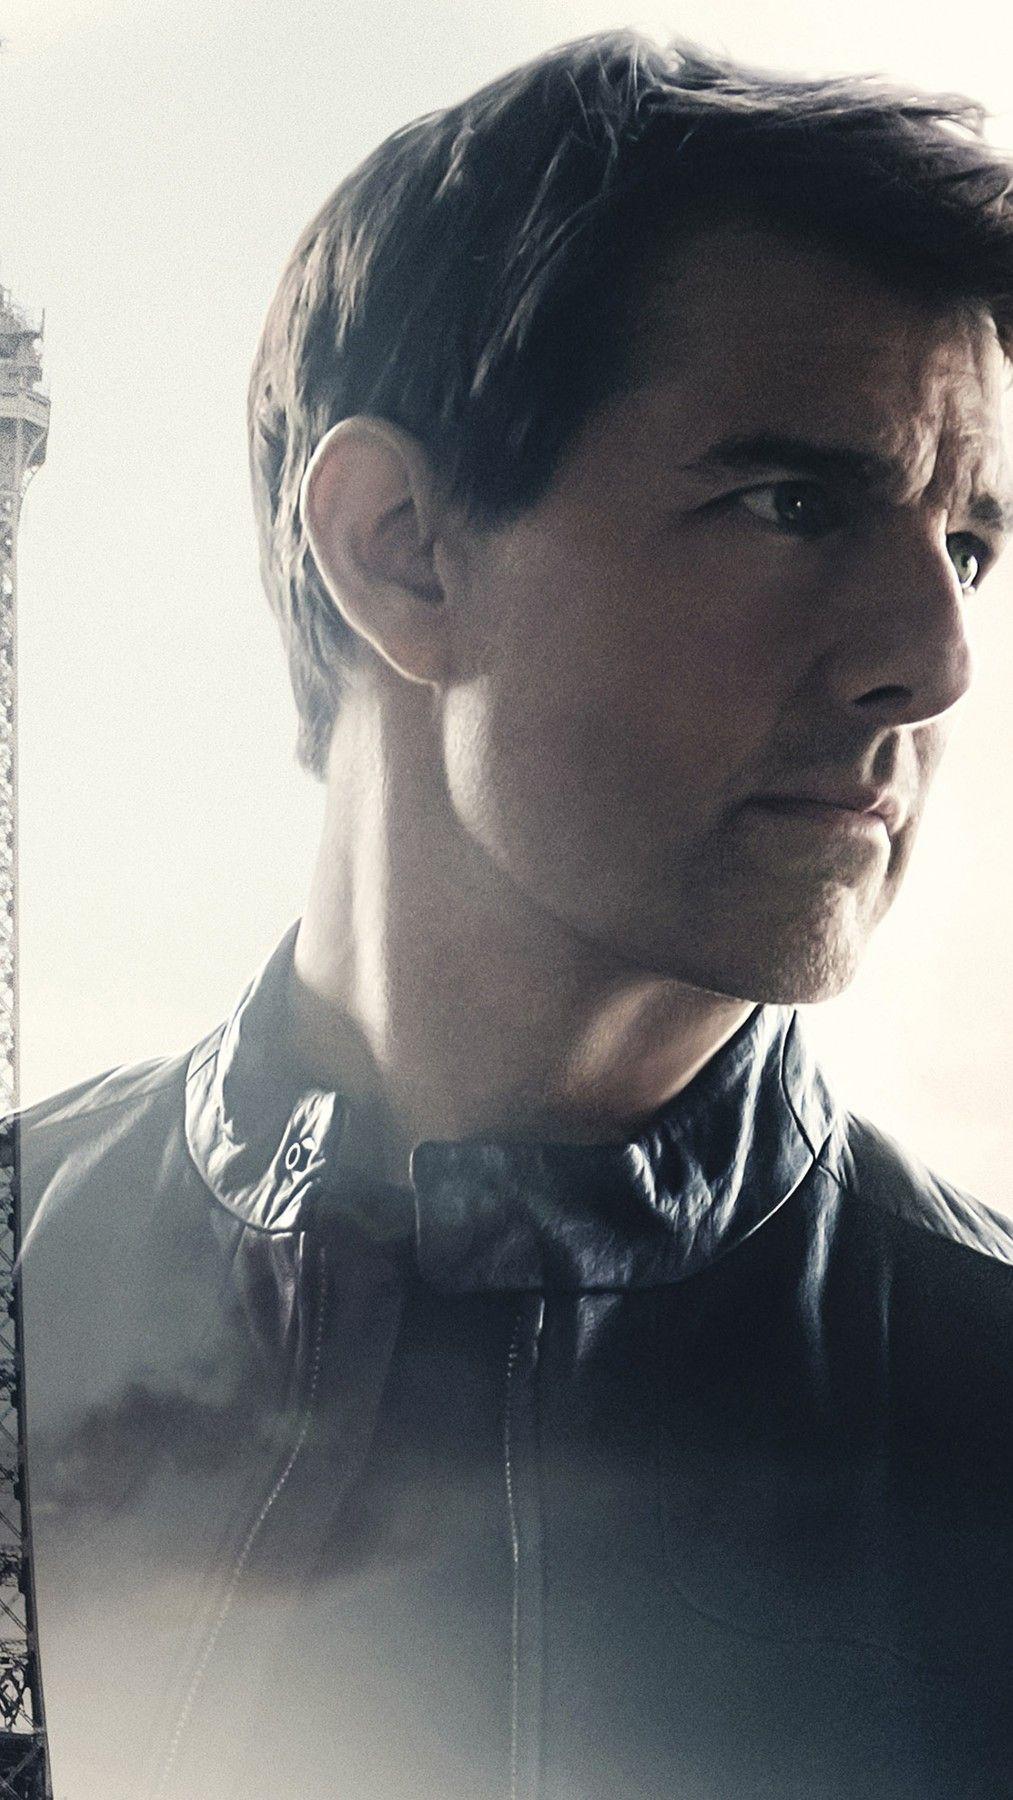 Mission Impossible iPhone Wallpapers - Top Free Mission Impossible ...